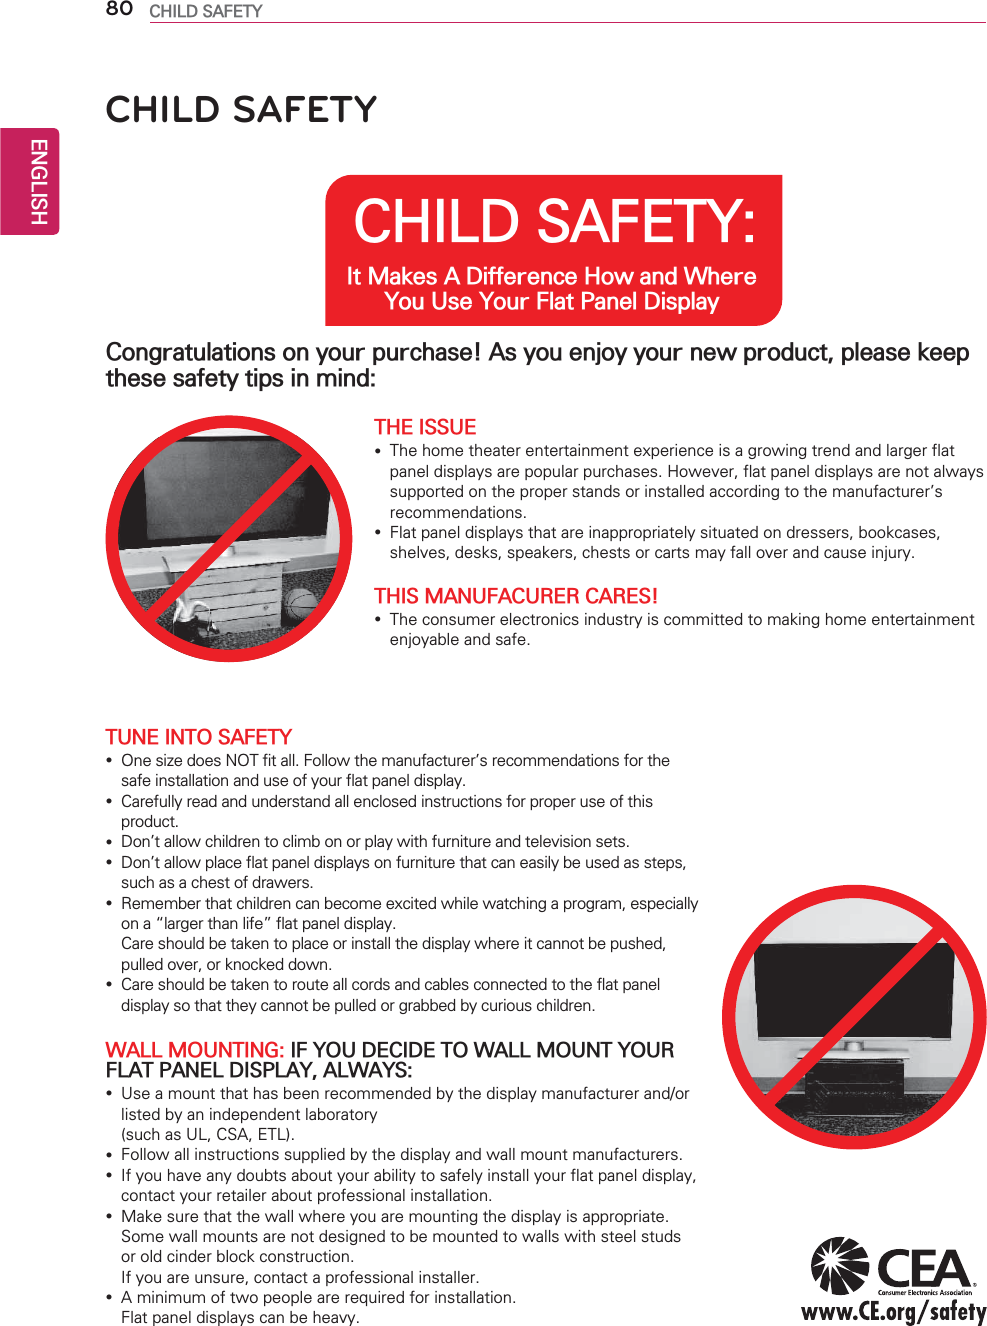 ENGLISH80 CHILD SAFETYCHILD SAFETY: It Makes A Difference How and Where You Use Your Flat Panel DisplayCongratulations on your purchase! As you enjoy your new product, please keep these safety tips in mind:THE ISSUE yThe home theater entertainment experience is a growing trend and larger flat panel displays are popular purchases. However, flat panel displays are not always supported on the proper stands or installed according to the manufacturer’s recommendations. yFlat panel displays that are inappropriately situated on dressers, bookcases, shelves, desks, speakers, chests or carts may fall over and cause injury.THIS MANUFACURER CARES! yThe consumer electronics industry is committed to making home entertainment enjoyable and safe.TUNE INTO SAFETY yOne size does NOT fit all. Follow the manufacturer’s recommendations for the safe installation and use of your flat panel display. yCarefully read and understand all enclosed instructions for proper use of this product. yDon’t allow children to climb on or play with furniture and television sets. yDon’t allow place flat panel displays on furniture that can easily be used as steps, such as a chest of drawers. yRemember that children can become excited while watching a program, especially on a “larger than life” flat panel display.  Care should be taken to place or install the display where it cannot be pushed, pulled over, or knocked down. yCare should be taken to route all cords and cables connected to the flat panel display so that they cannot be pulled or grabbed by curious children.WALL MOUNTING: IF YOU DECIDE TO WALL MOUNT YOUR FLAT PANEL DISPLAY, ALWAYS: yUse a mount that has been recommended by the display manufacturer and/or listed by an independent laboratory  (such as UL, CSA, ETL). yFollow all instructions supplied by the display and wall mount manufacturers. yIf you have any doubts about your ability to safely install your flat panel display, contact your retailer about professional installation. yMake sure that the wall where you are mounting the display is appropriate. Some wall mounts are not designed to be mounted to walls with steel studs or old cinder block construction.  If you are unsure, contact a professional installer. yA minimum of two people are required for installation.  Flat panel displays can be heavy.CHILD SAFETY